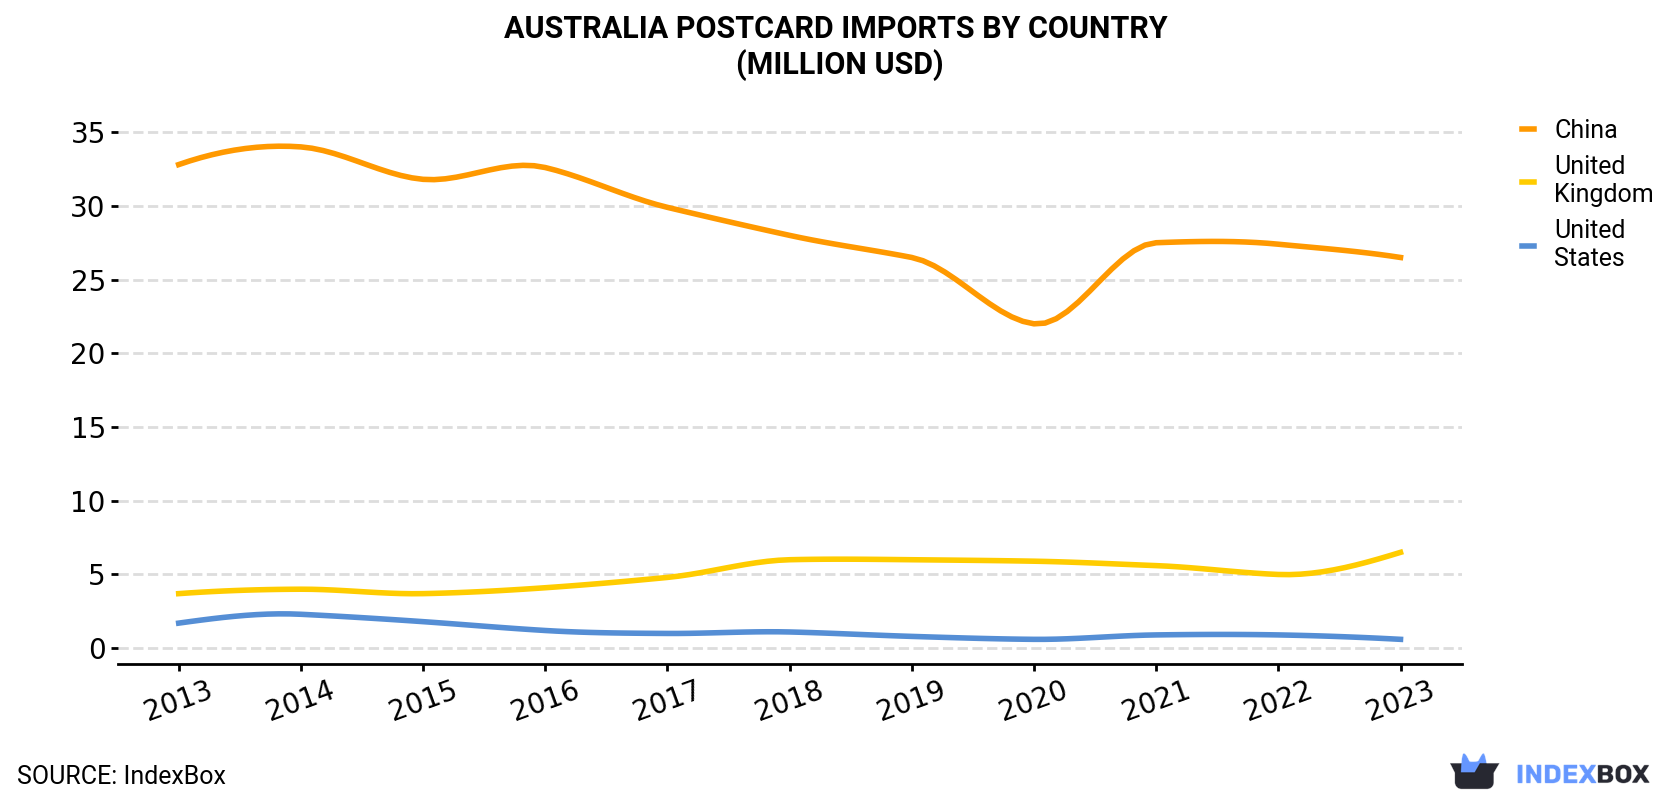 Australia Postcard Imports By Country (Million USD)